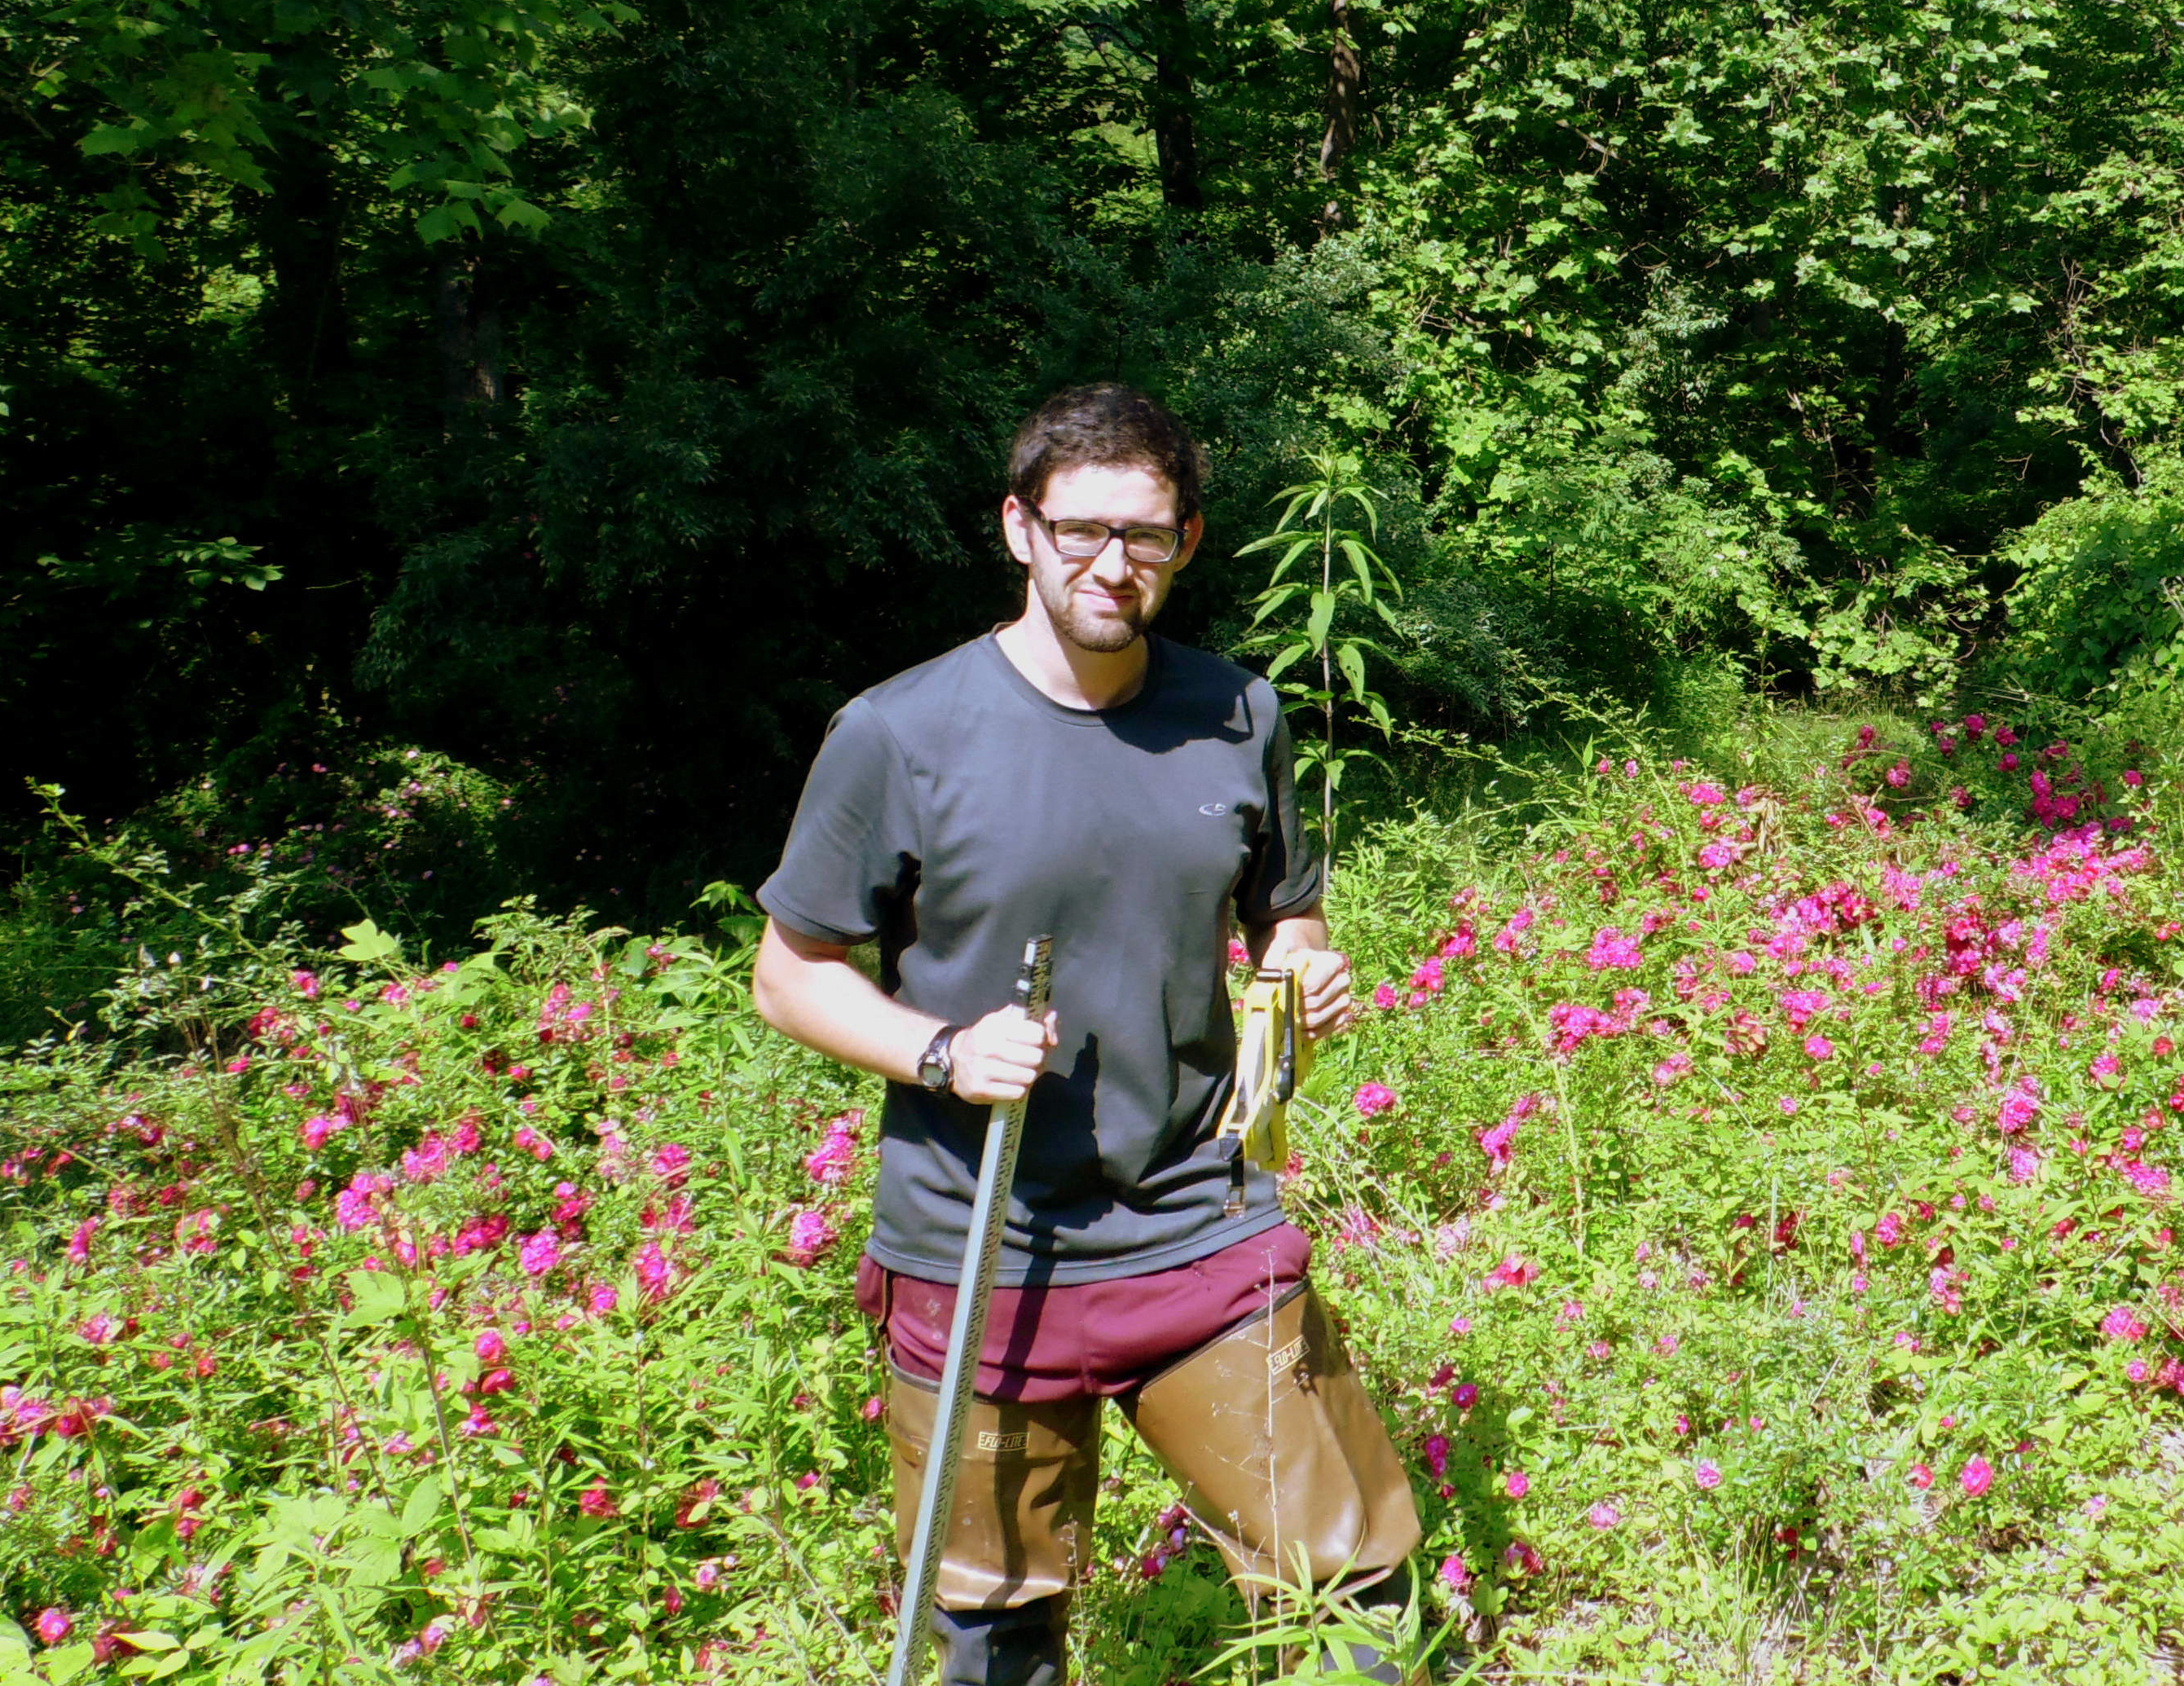 Matthew Razaire takes surface water samples in Wise County, Virginia